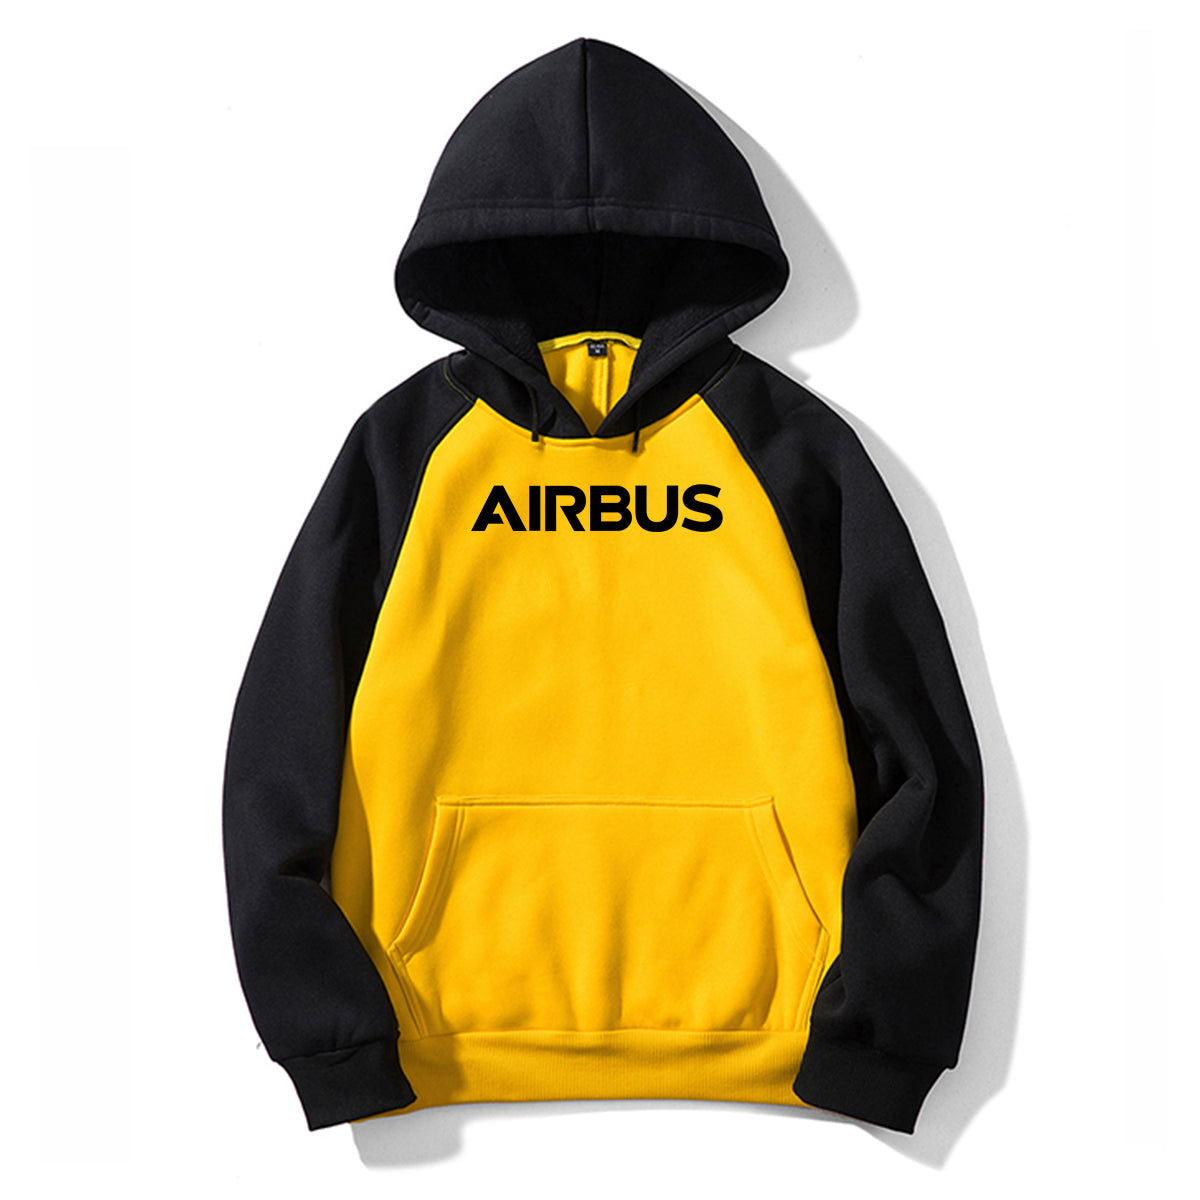 Airbus & Text Designed Colourful Hoodies